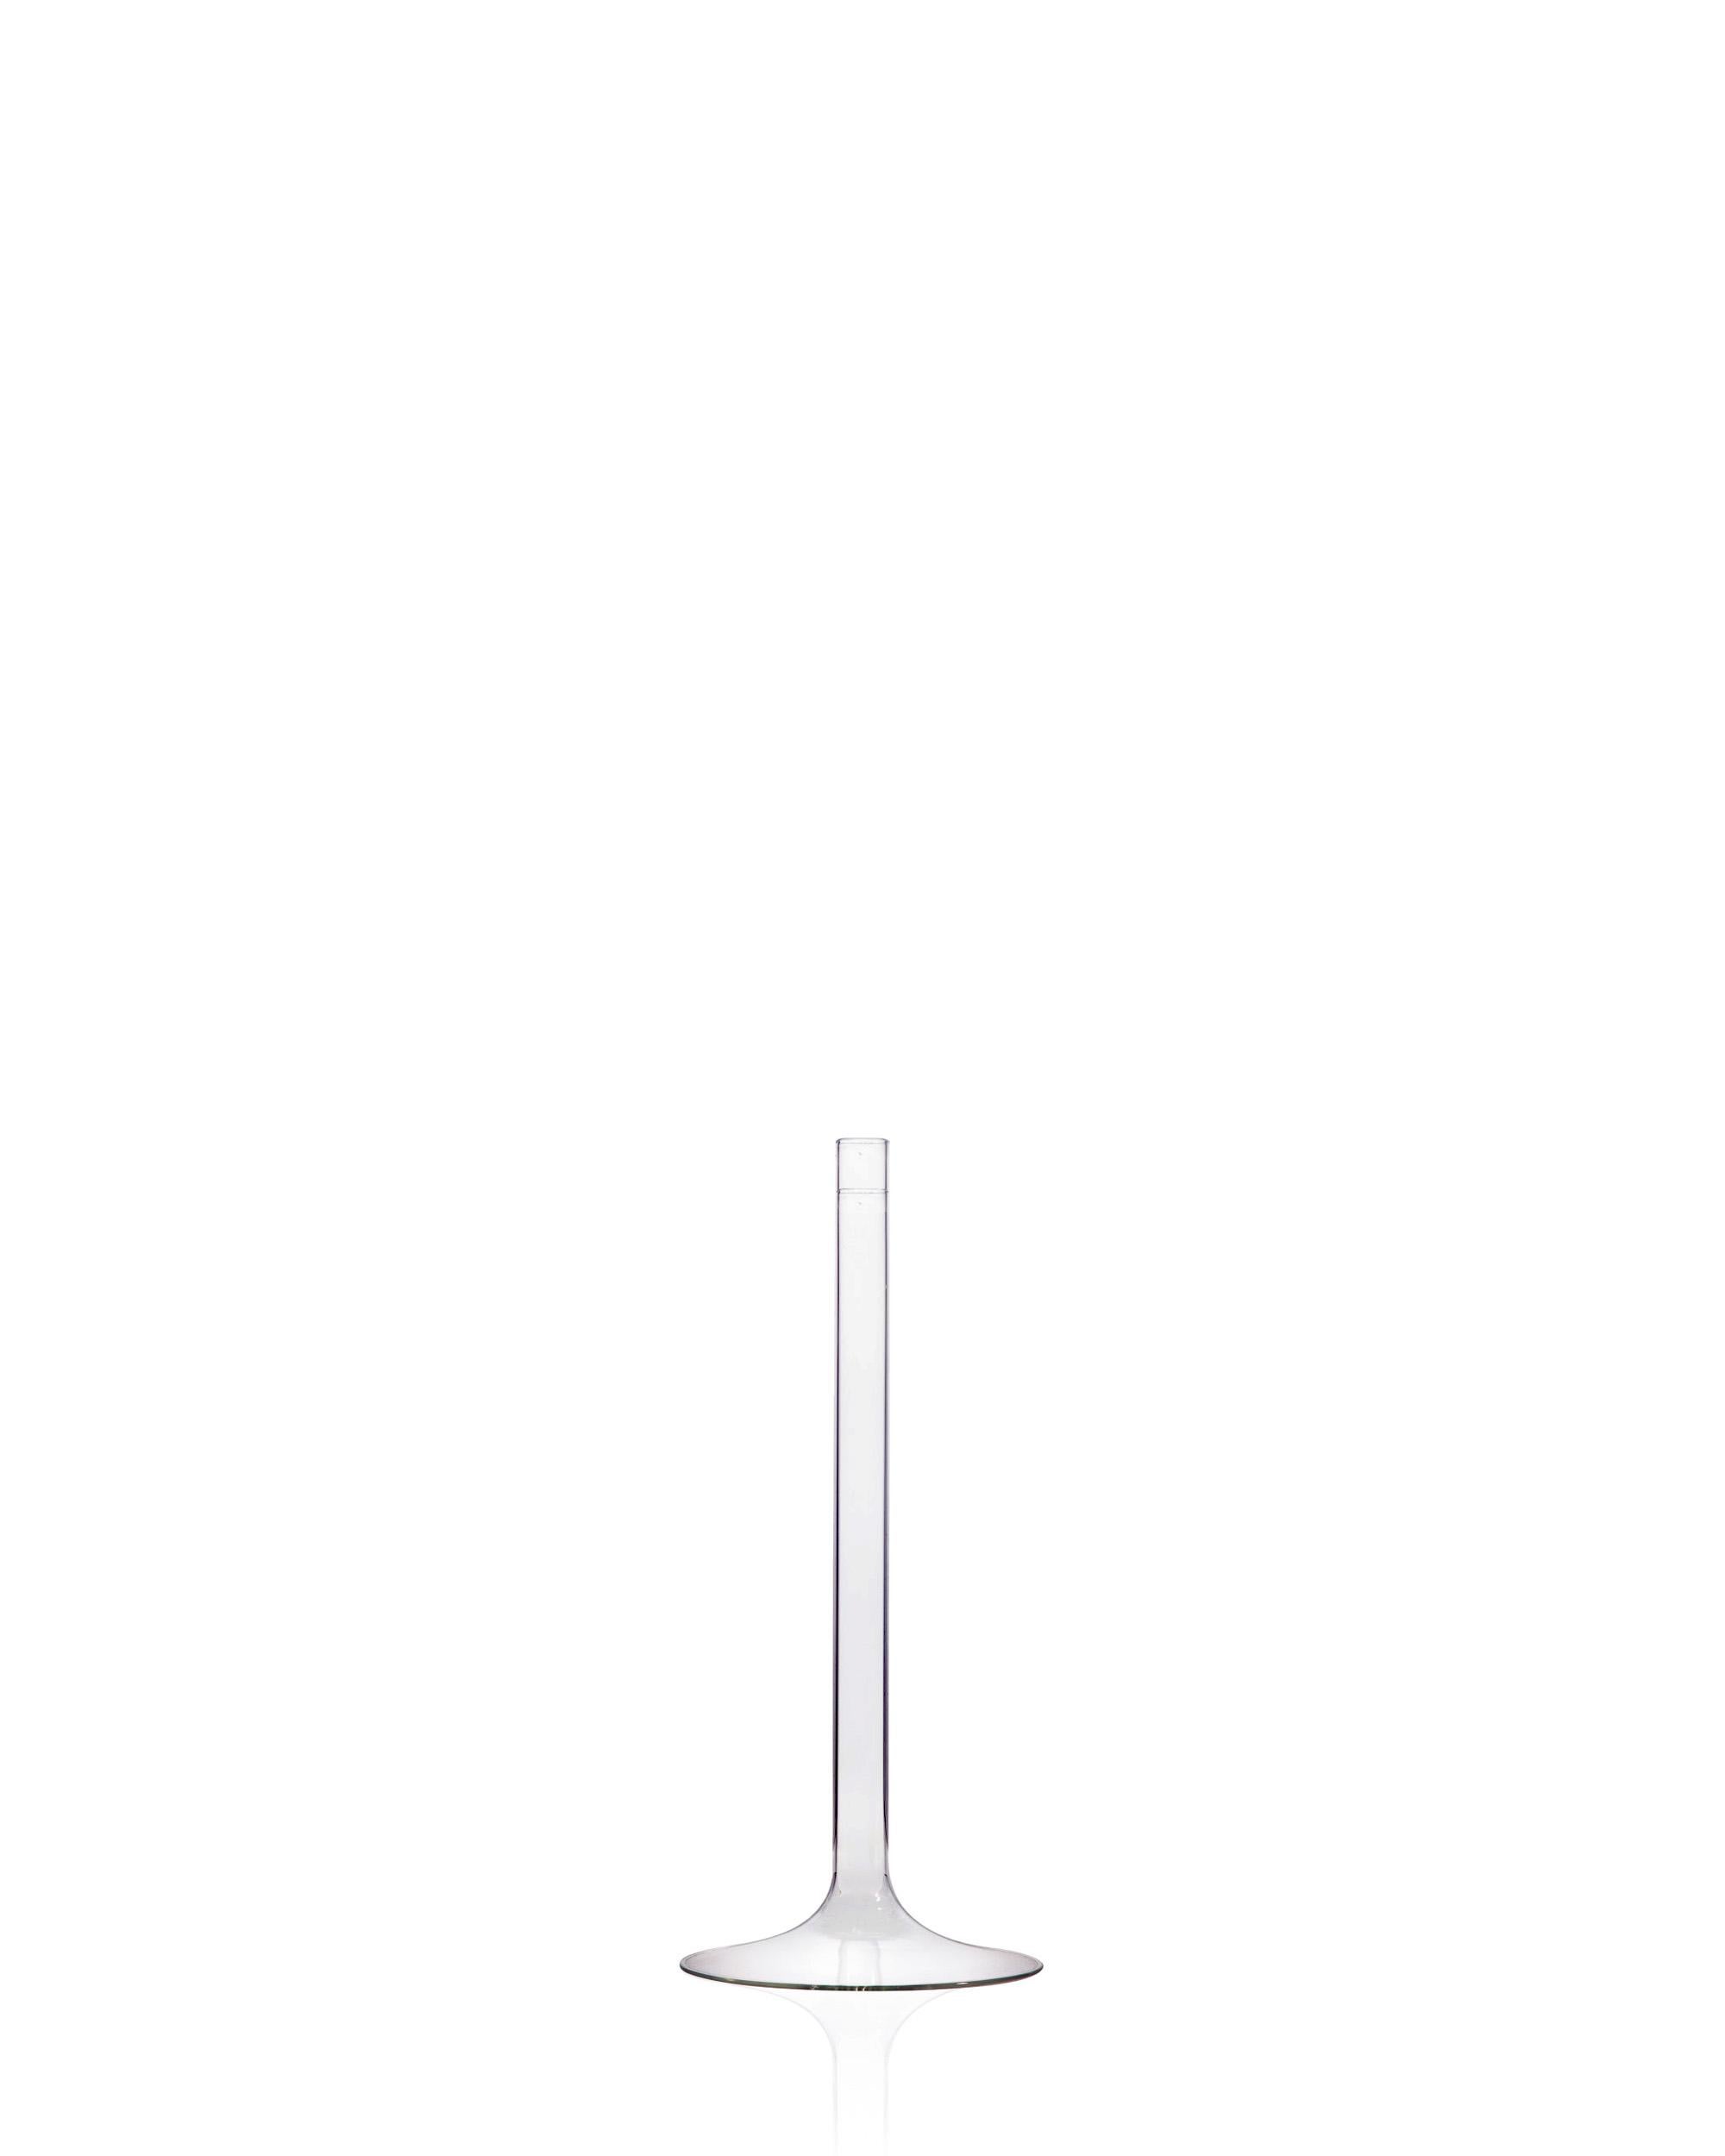 Linea candlestick large

The Linea candlesticks derive their name from the creative act of making a line, the first expression of a design, and from its linearity as it transitions from candlestick to candle.
The handcrafted Linea candlestick